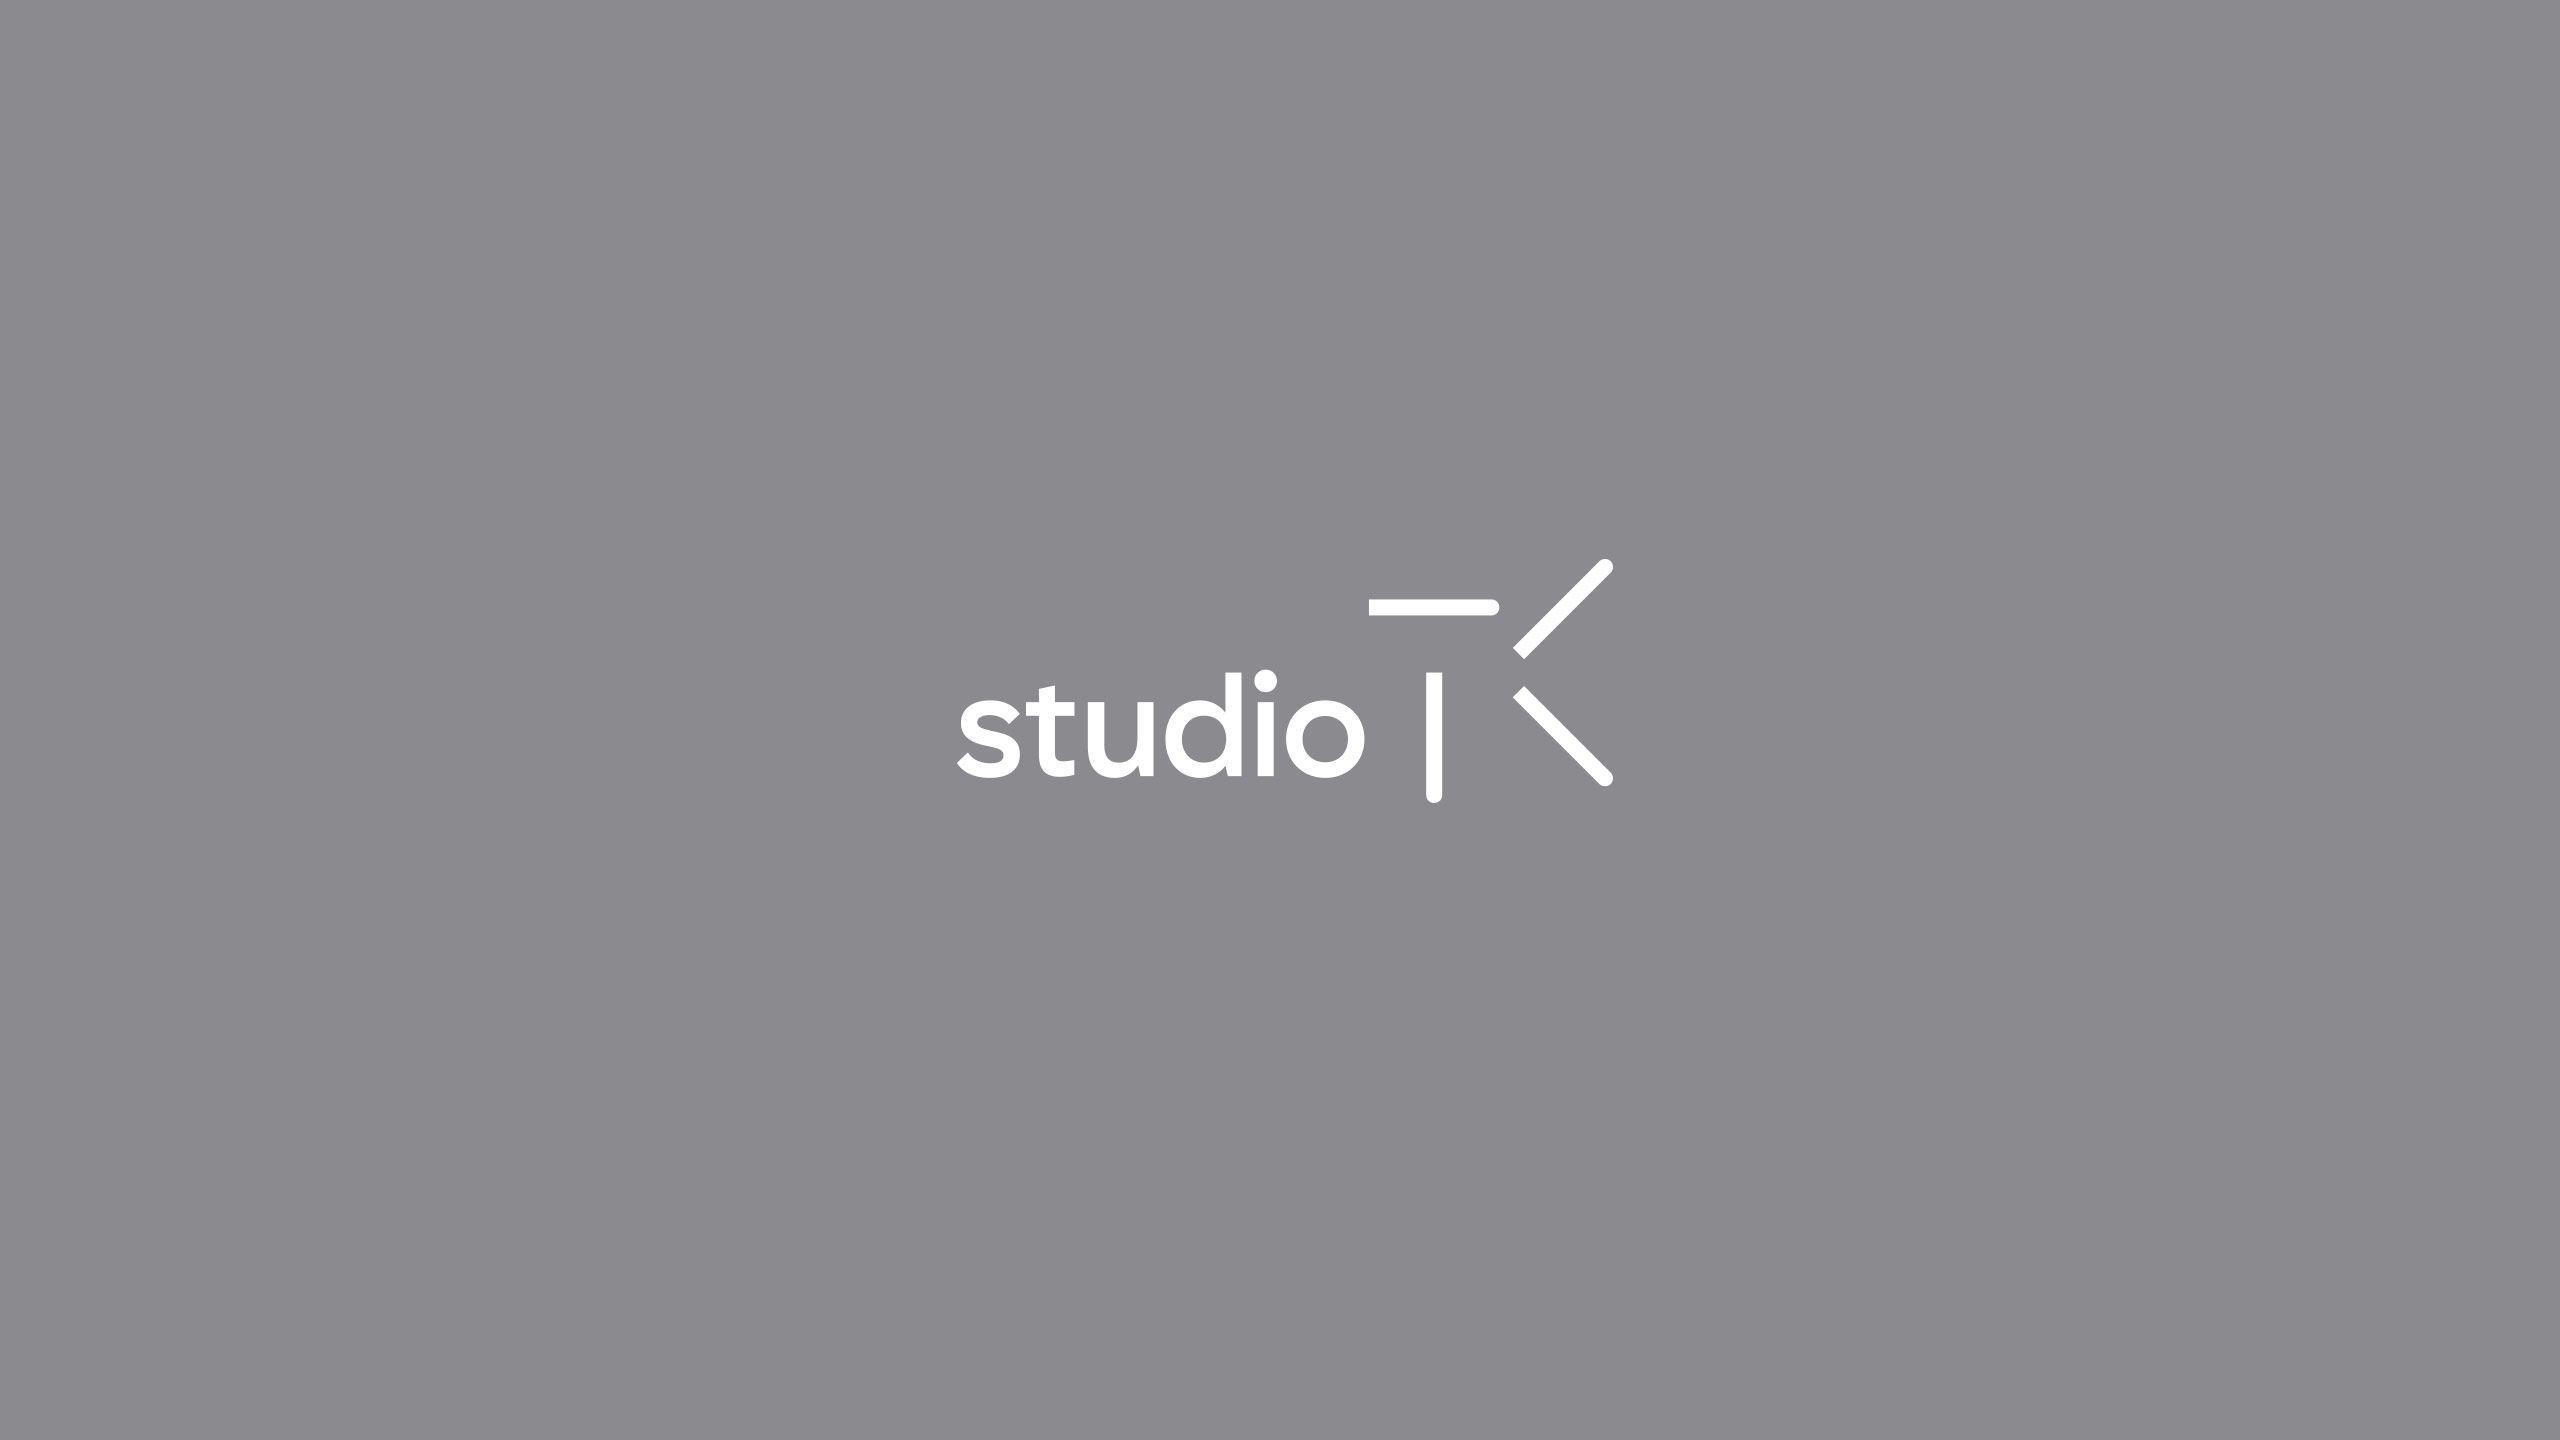 Tolleson Logo - Studio TK Brand Launch by Tolleson Design | design | Product launch ...